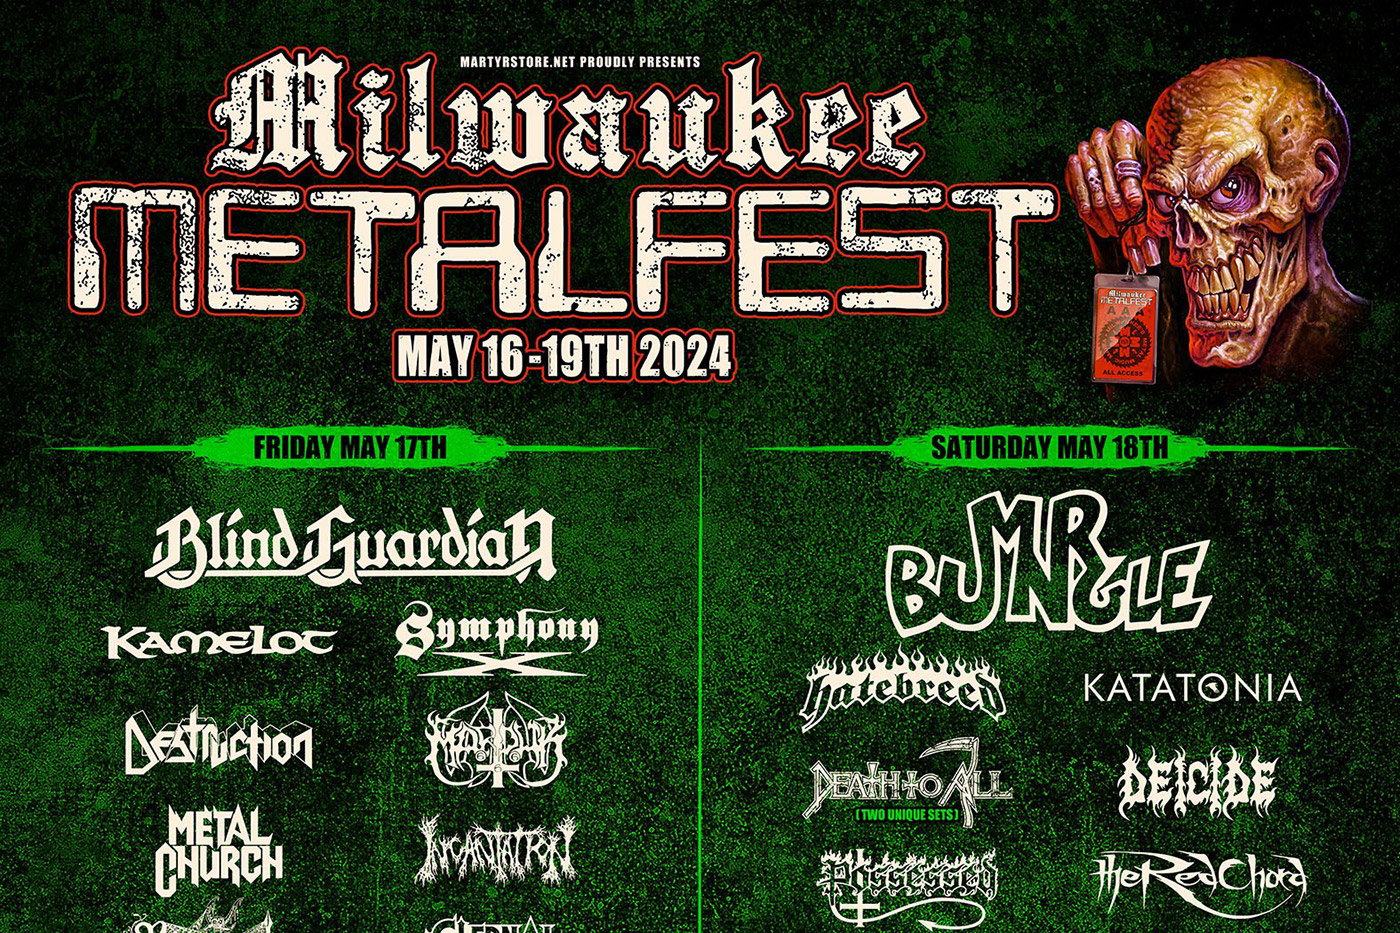 Milwaukee Metalfest adds bands to 2024 edition, announces lineup by day